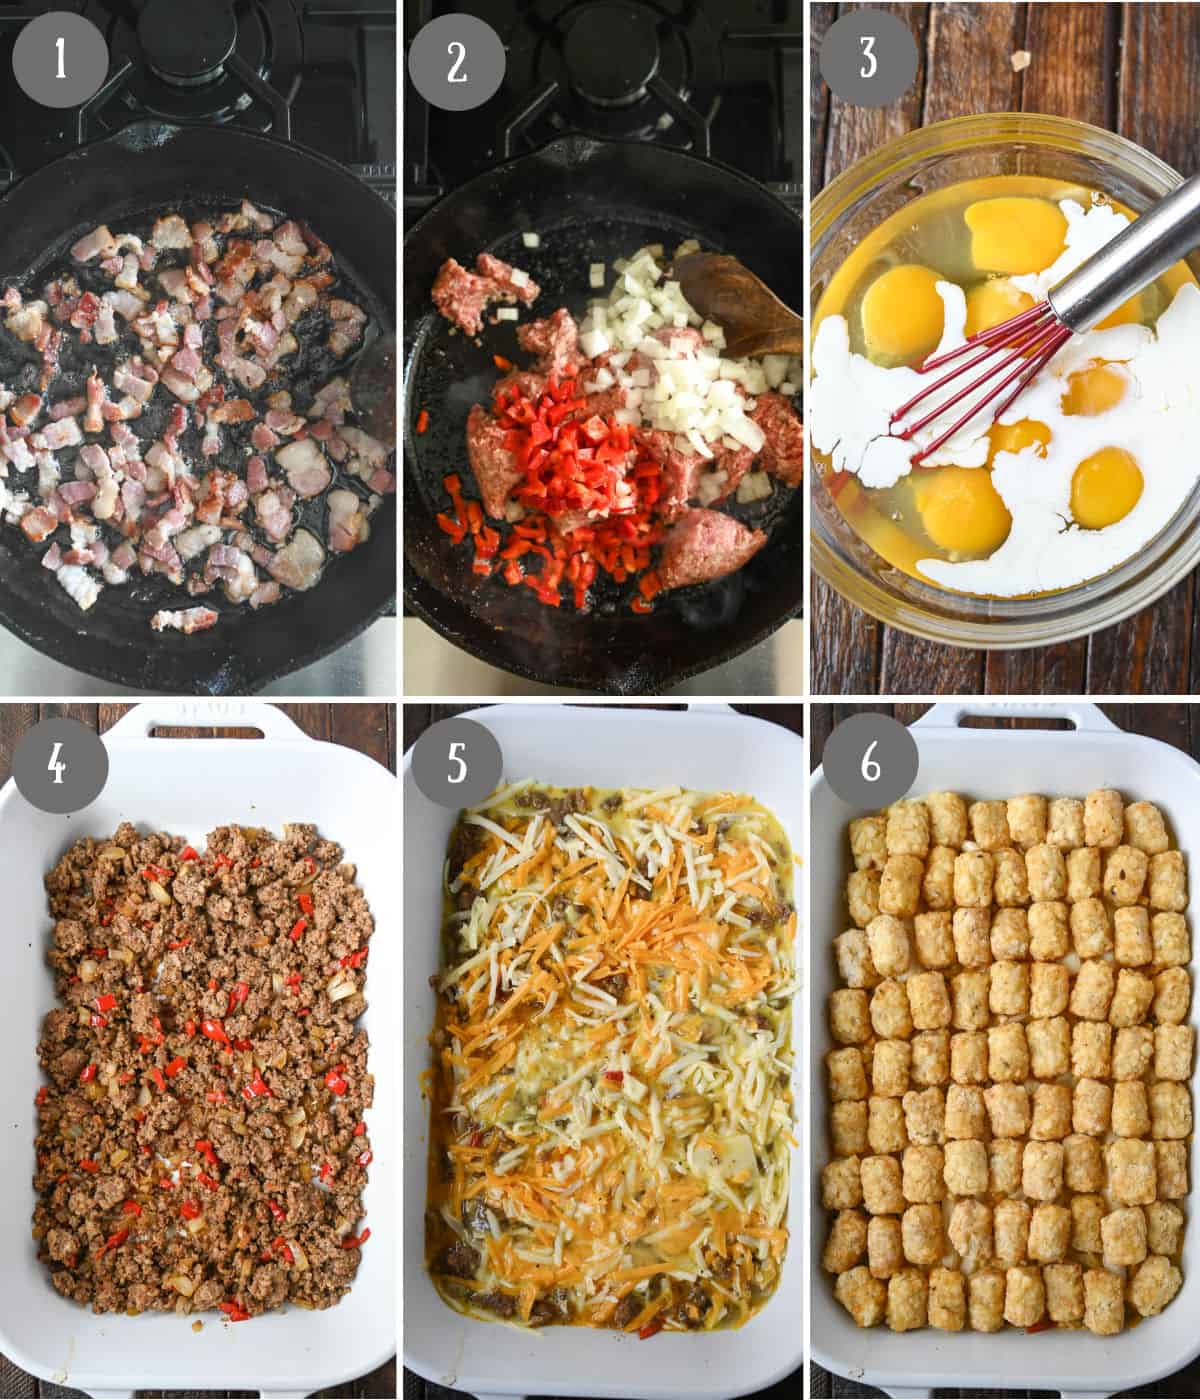 Six process photos. First one, bacon pieces being fried in a skillet. Second one, Sausage and veggies being cooked in a skillet. Third one, eggs and milk in a bowl. Fourth one, sausage and veggies placed in the bottom of a baking dish. Fifth one, eggs and cheese placed on top. Sixth one, tatot tots placed on top.